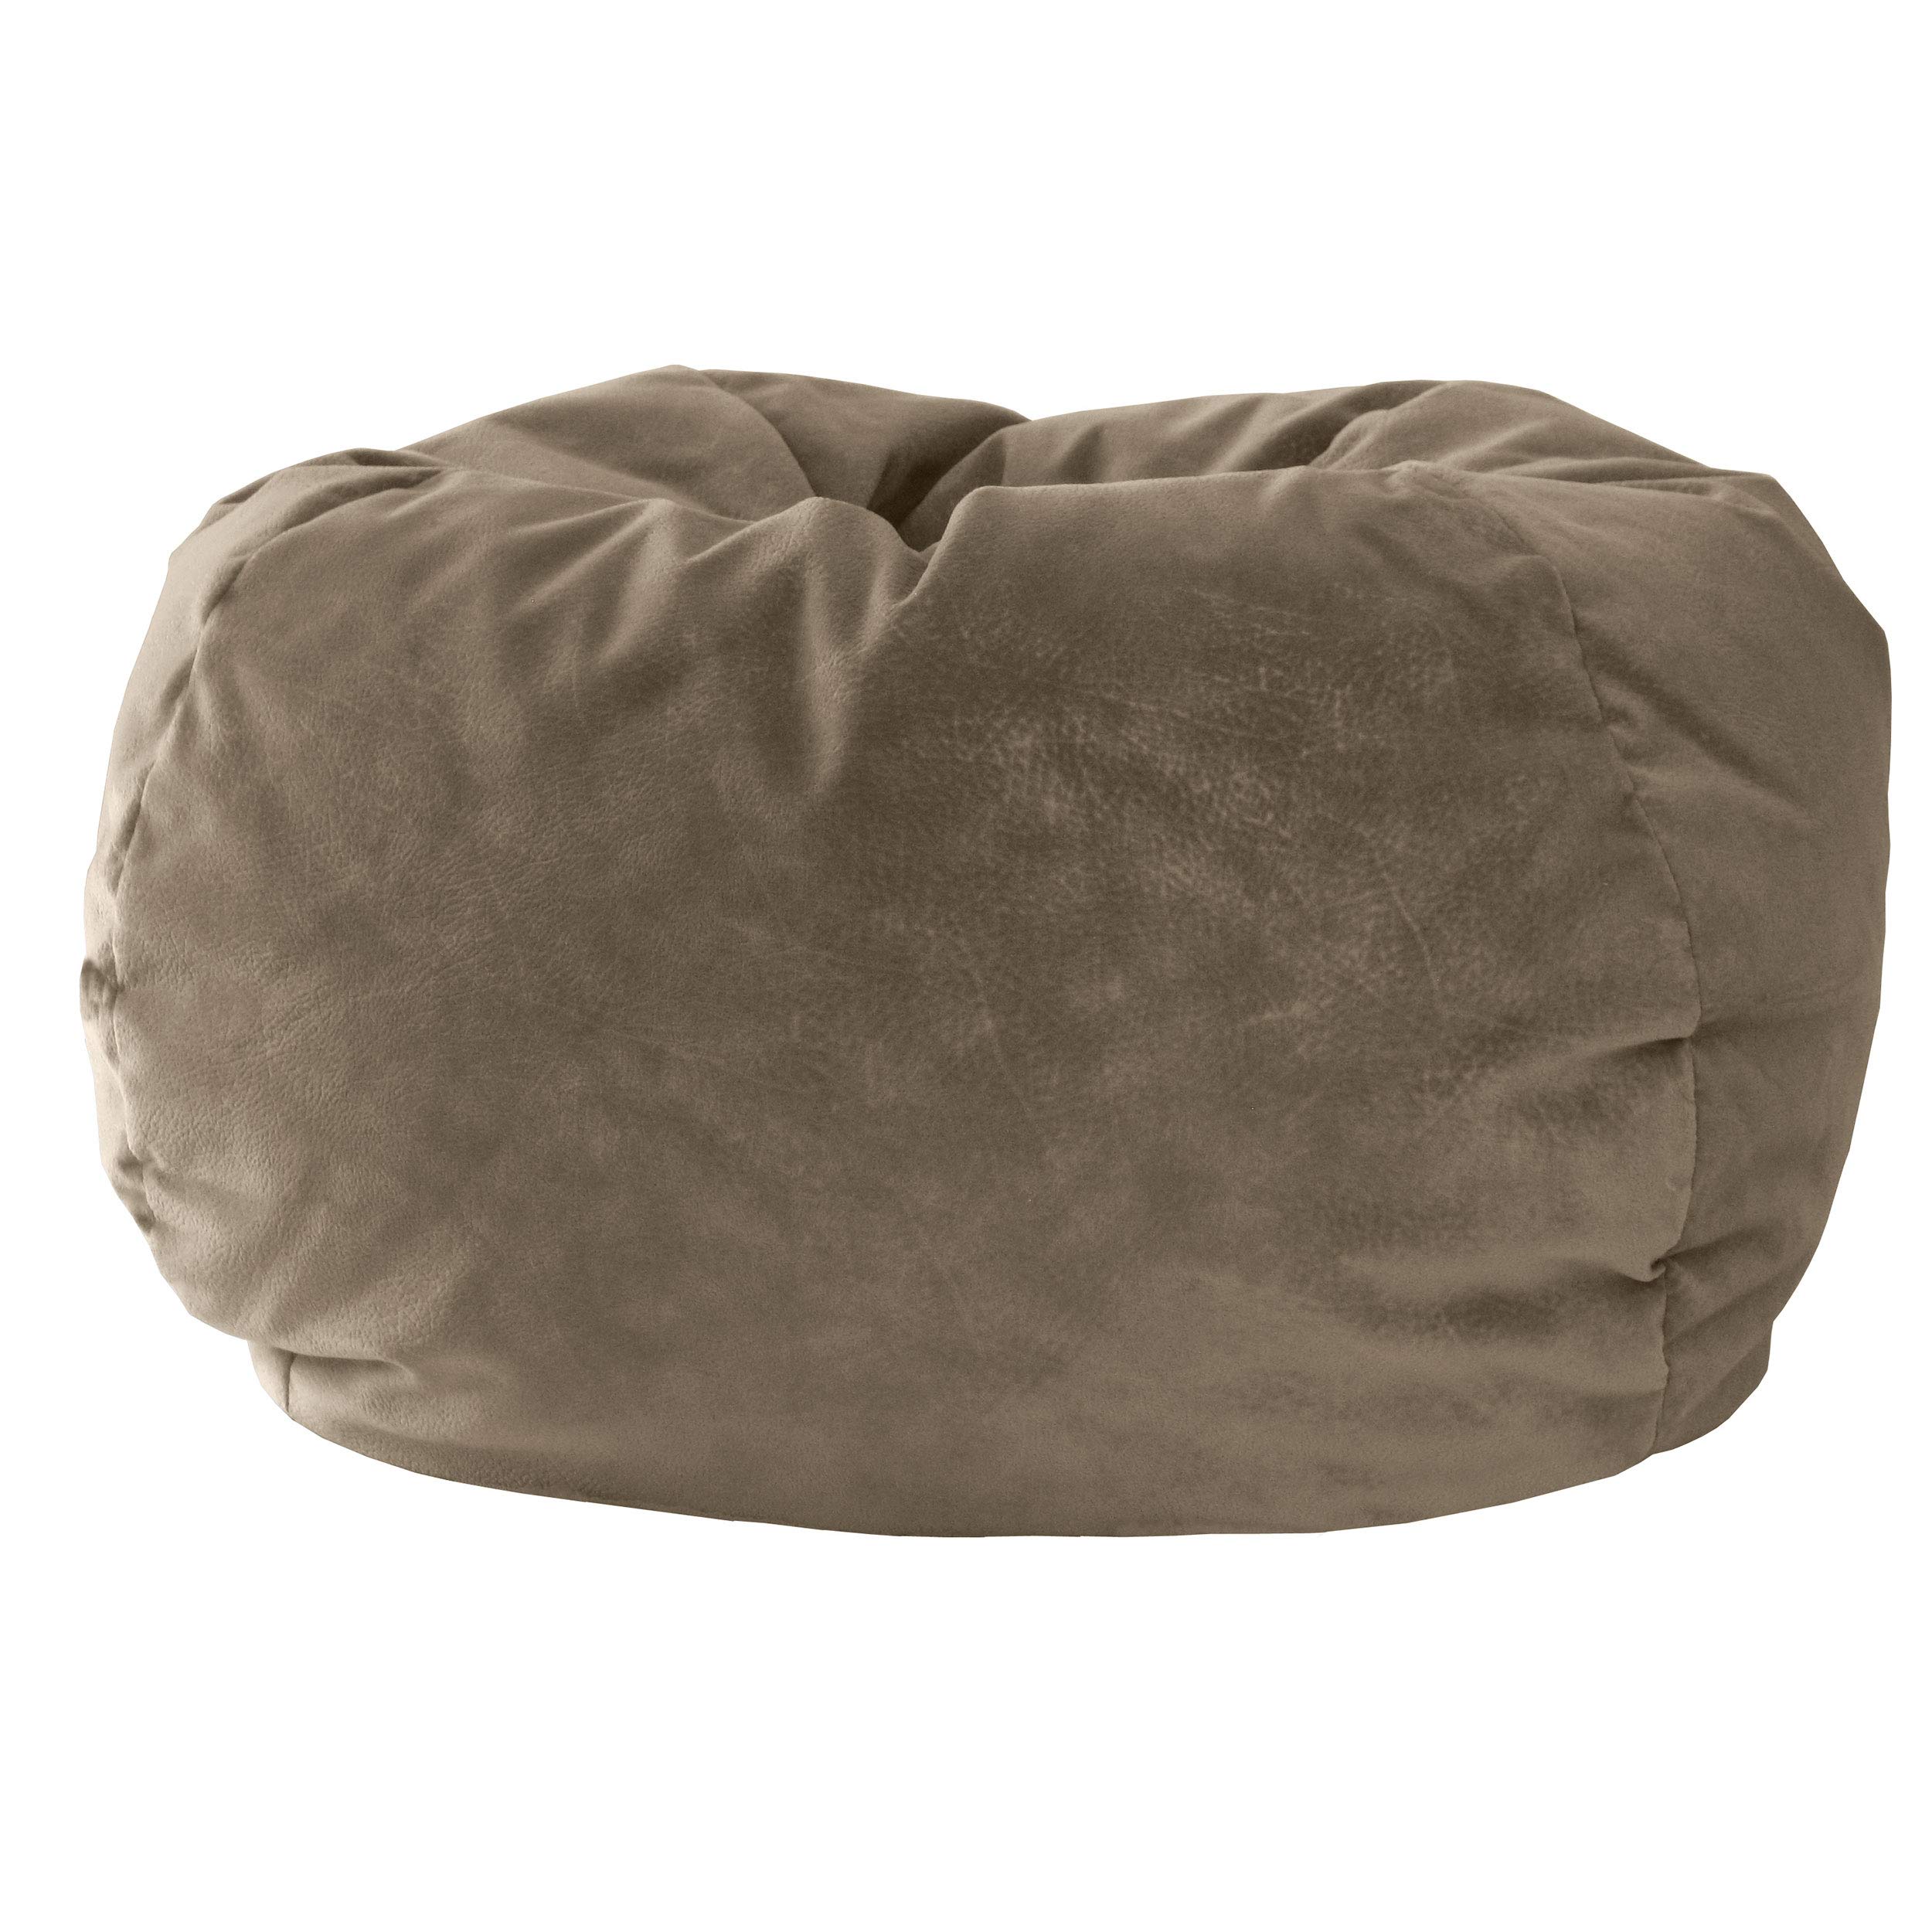 gold Medal Microsuede Bean Bag, Extra Large, Buff